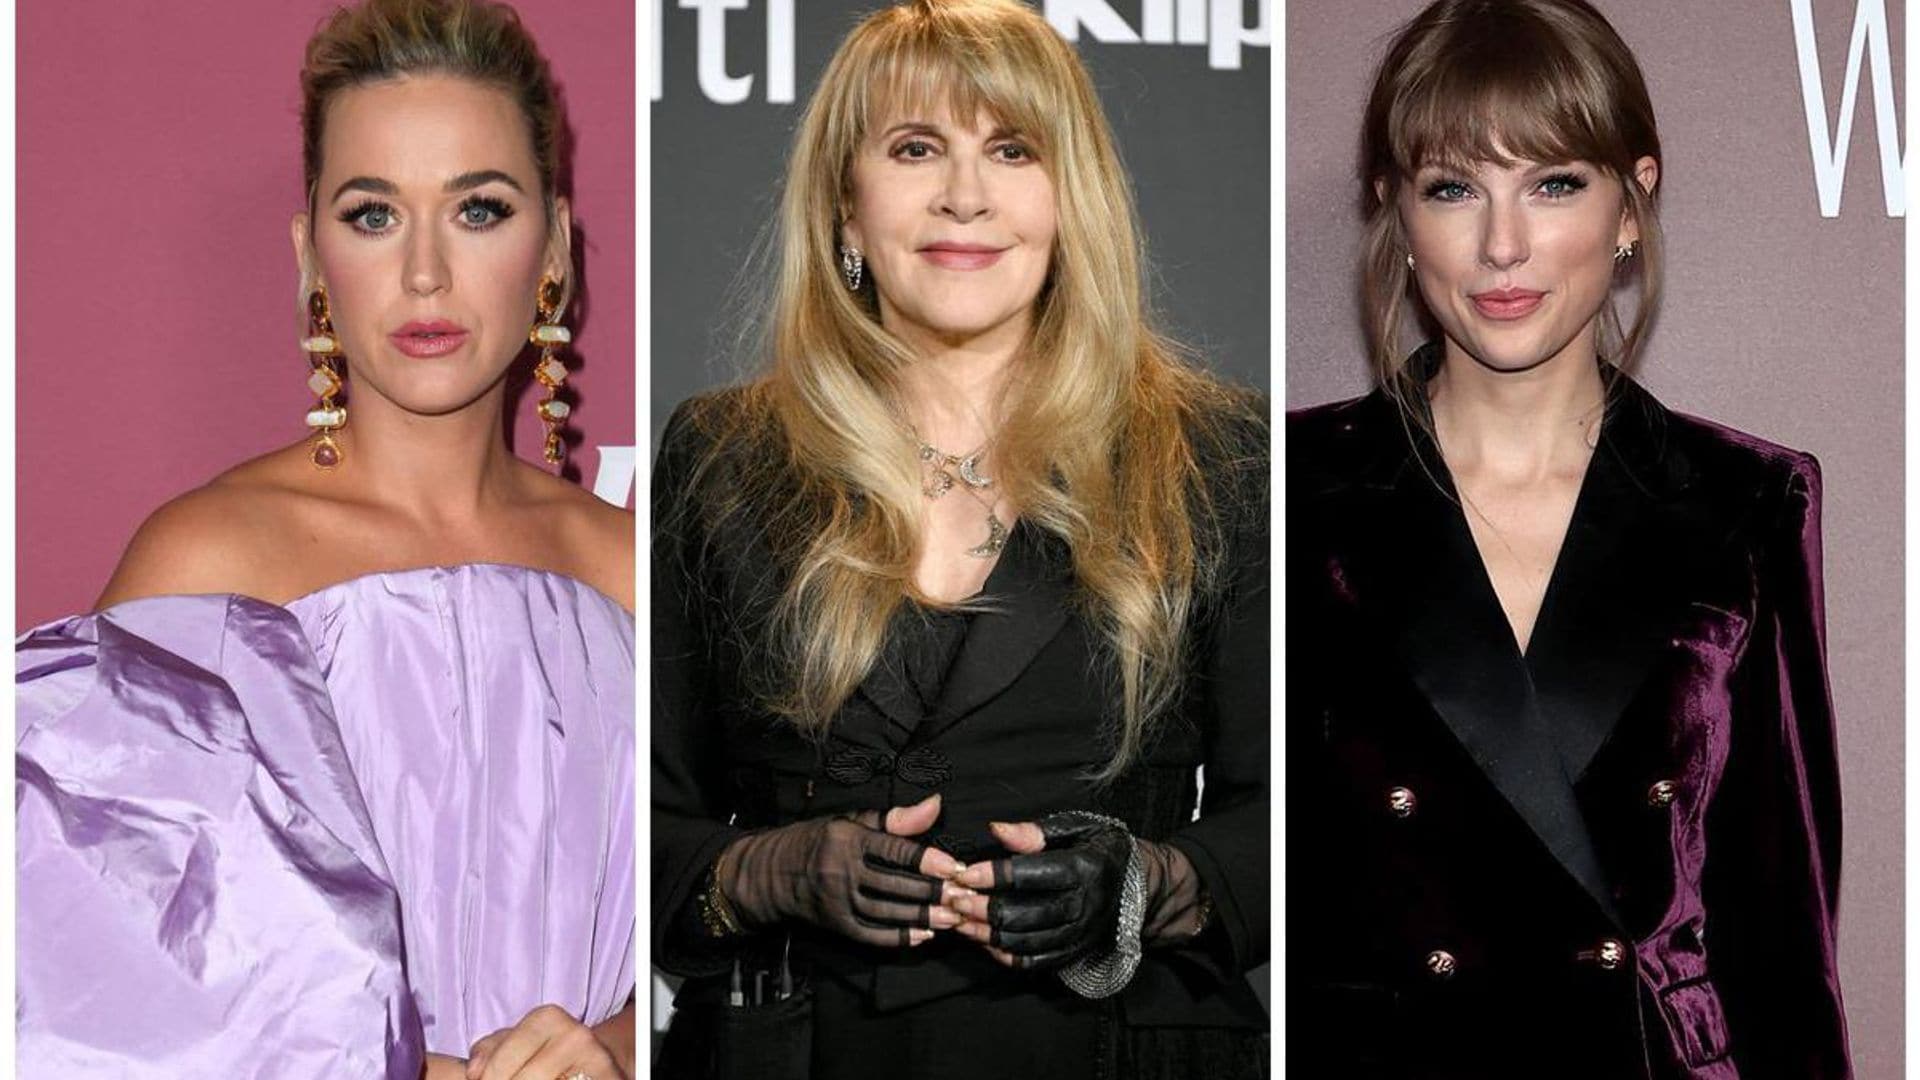 Stevie Nicks gave Katy Perry advice about her feud with Taylor Swift: ‘Walk away from that’